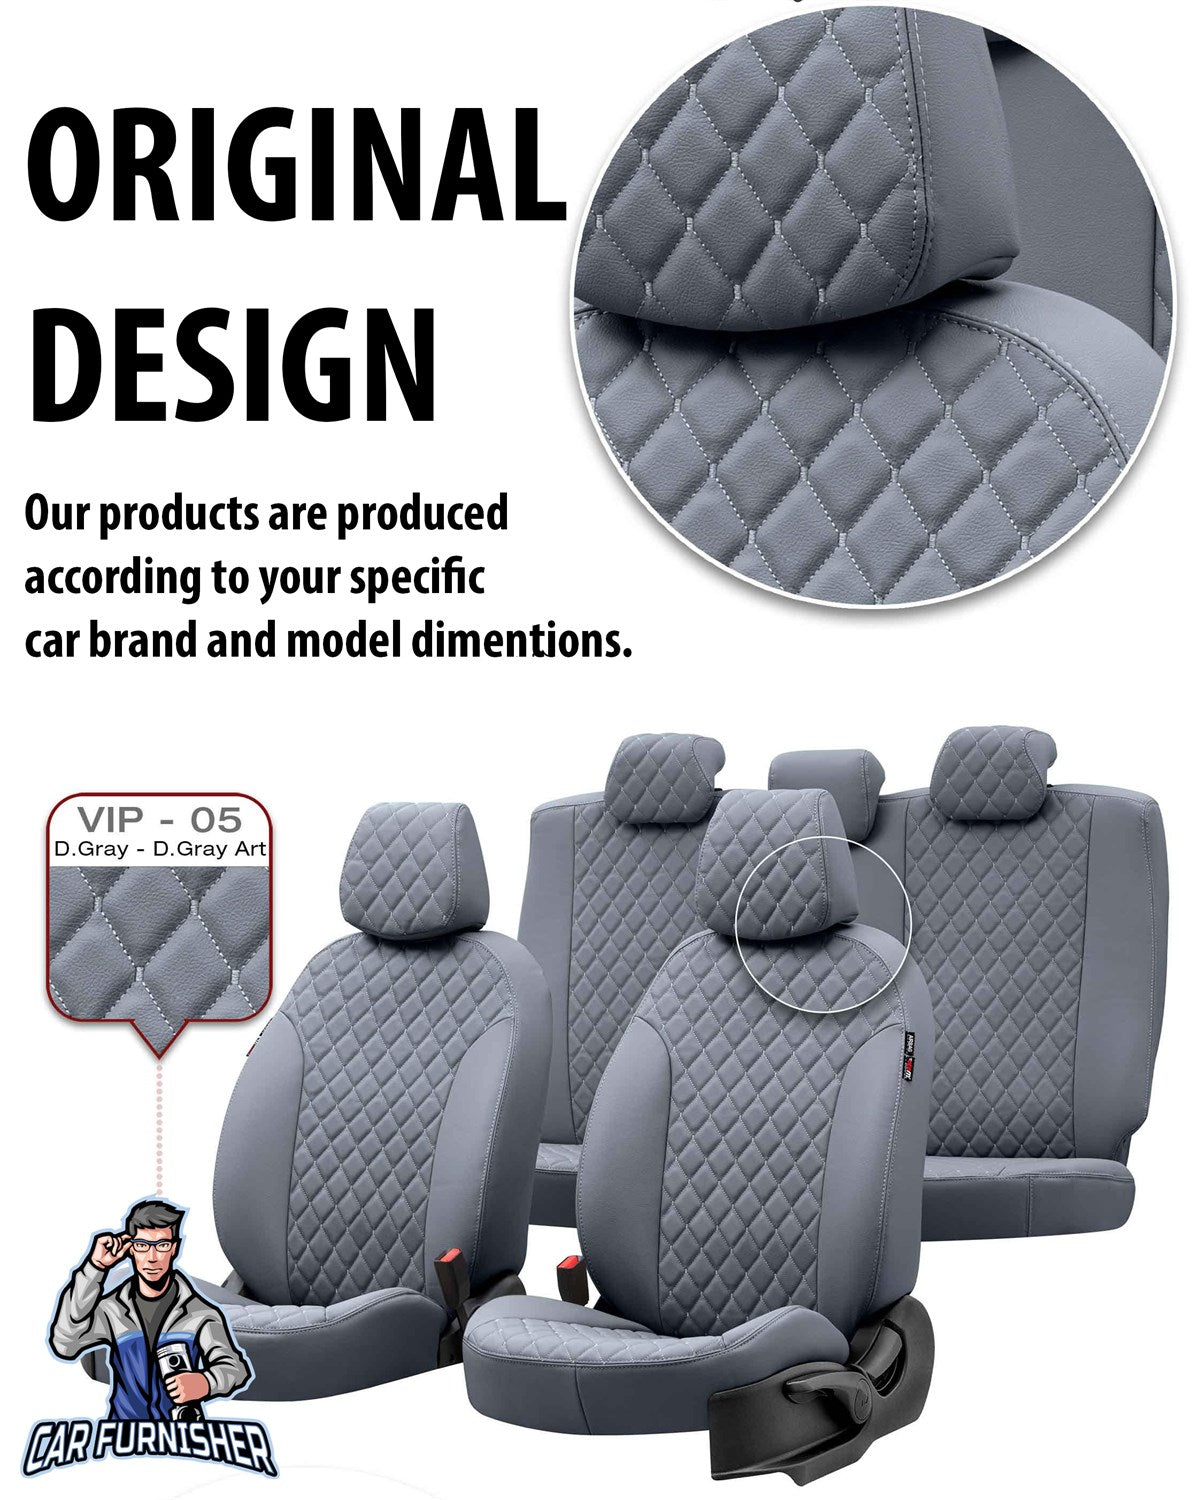 Ssangyong Korando Seat Covers Madrid Leather Design Dark Gray Leather